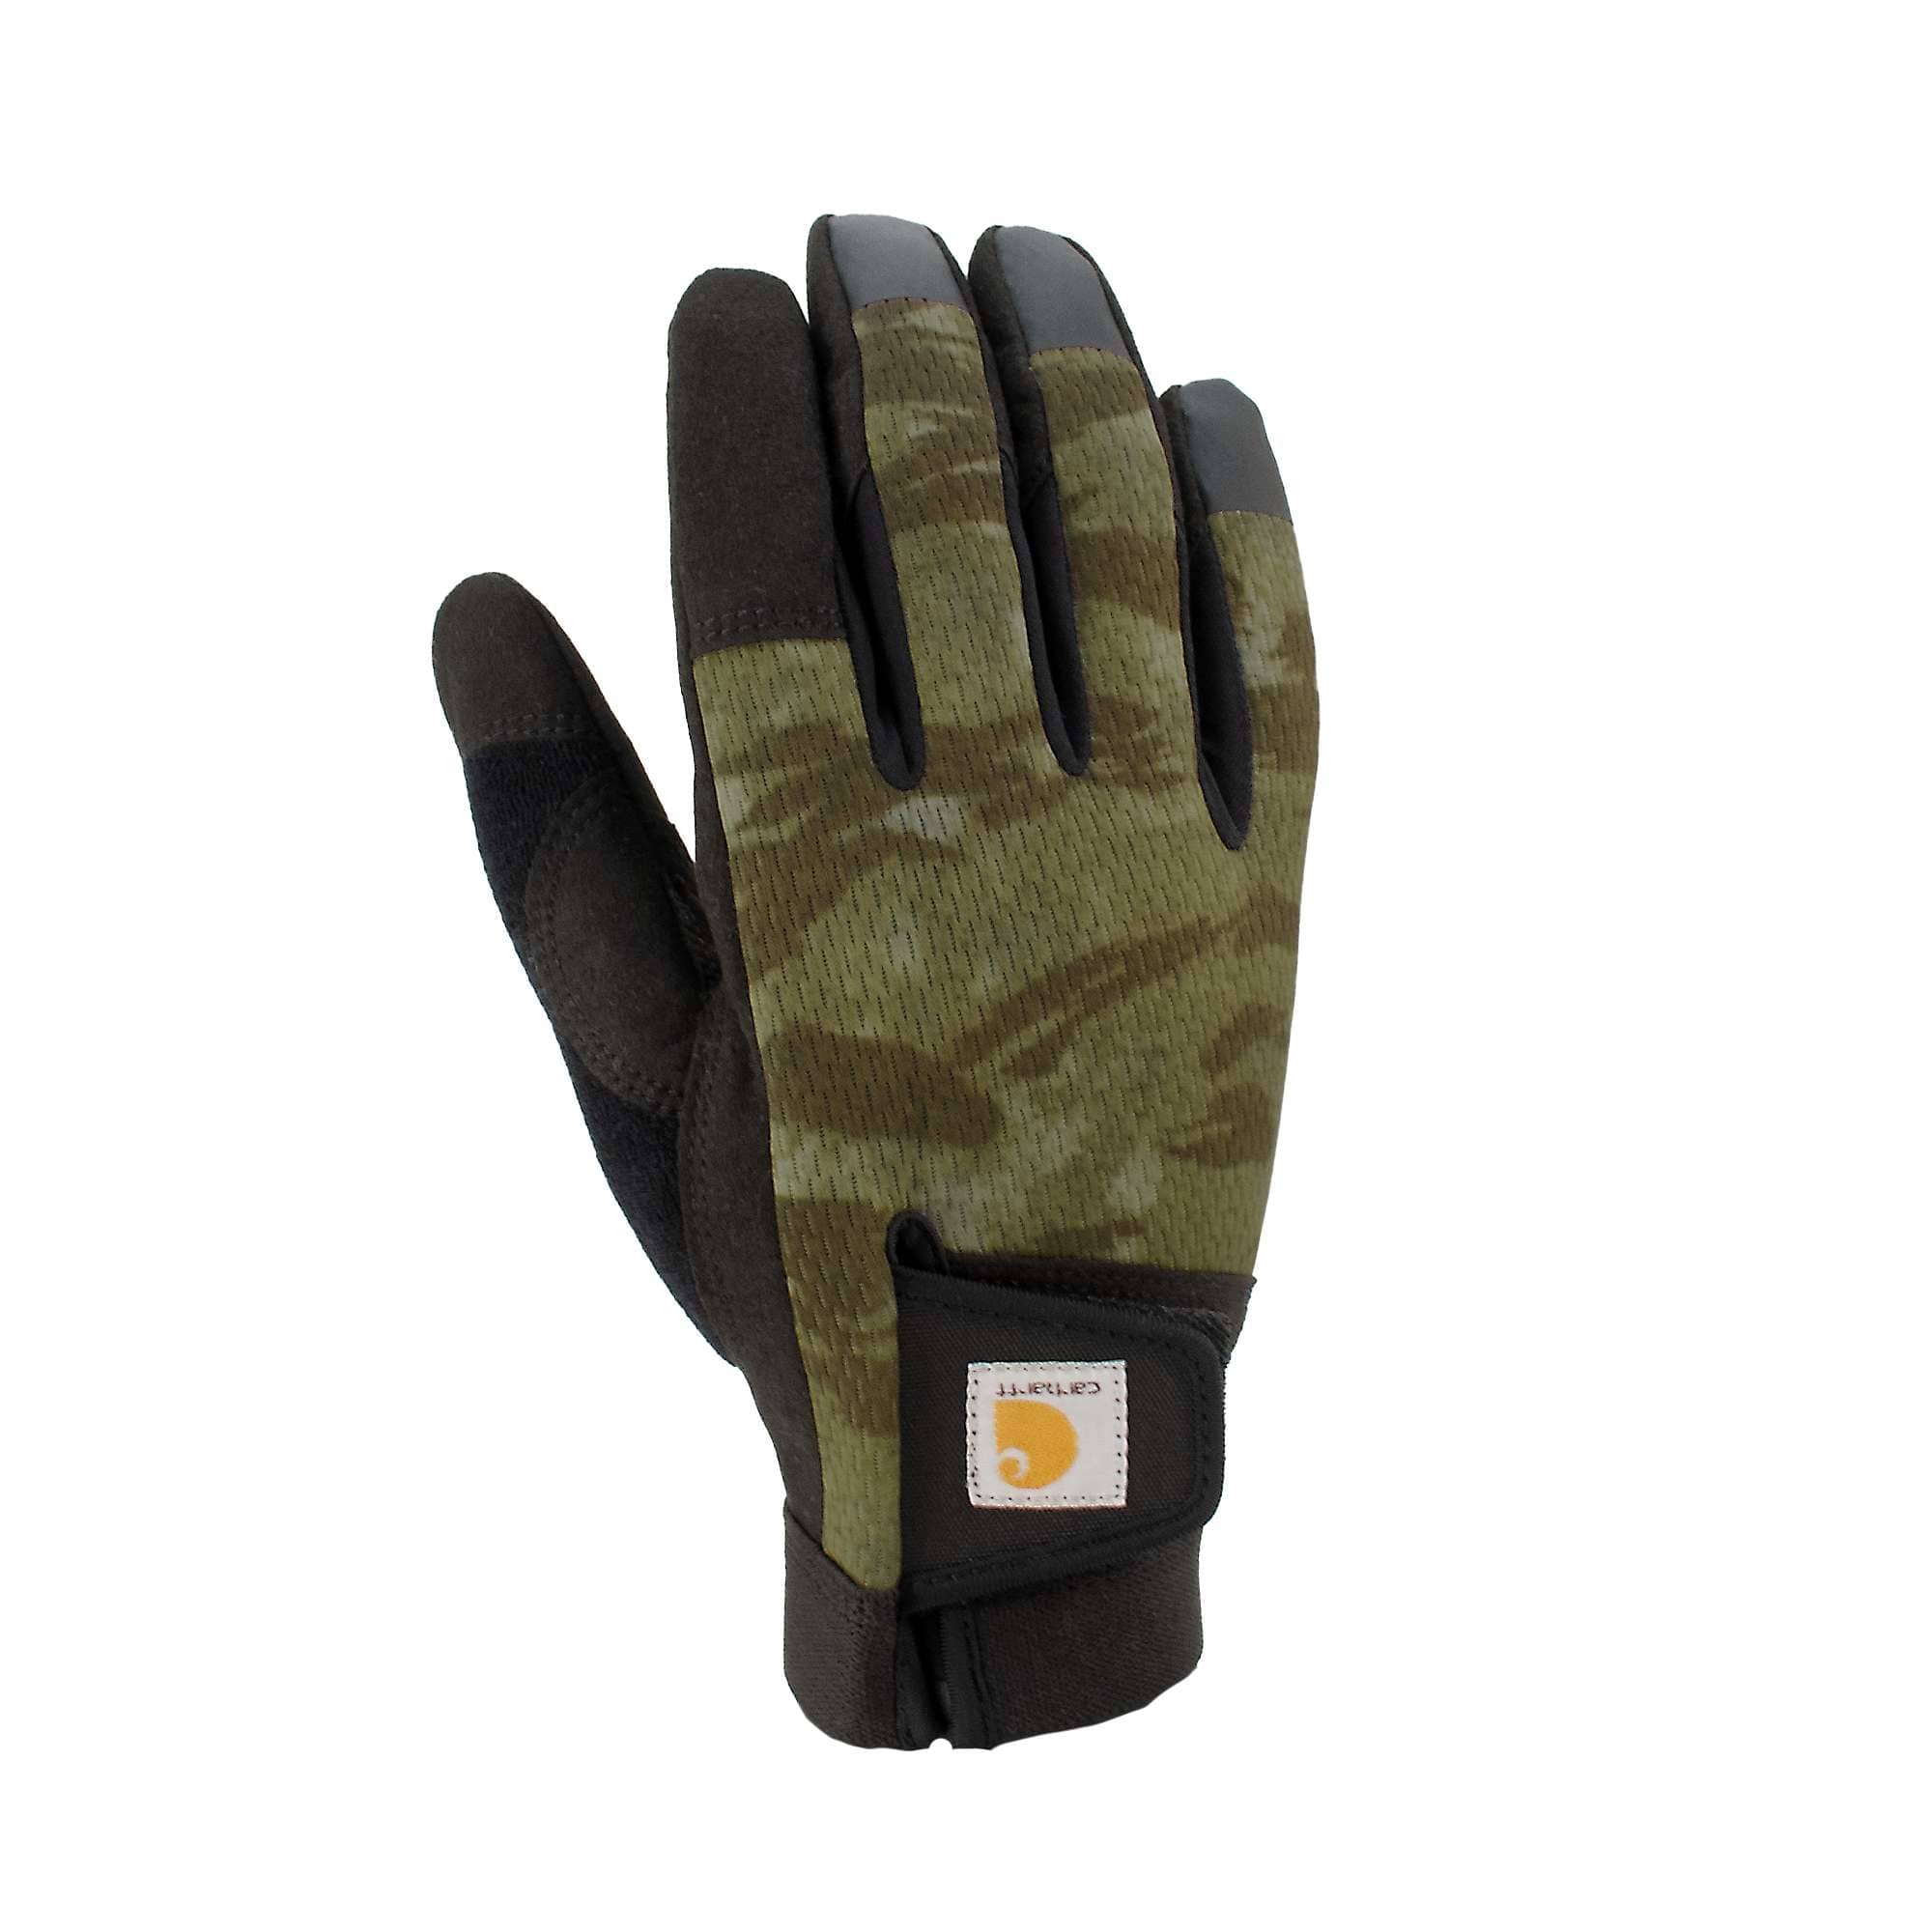 Carhartt Men's Synthetic Leather High Dexterity Touch Sensitive Secure Grip  Cuff Glove